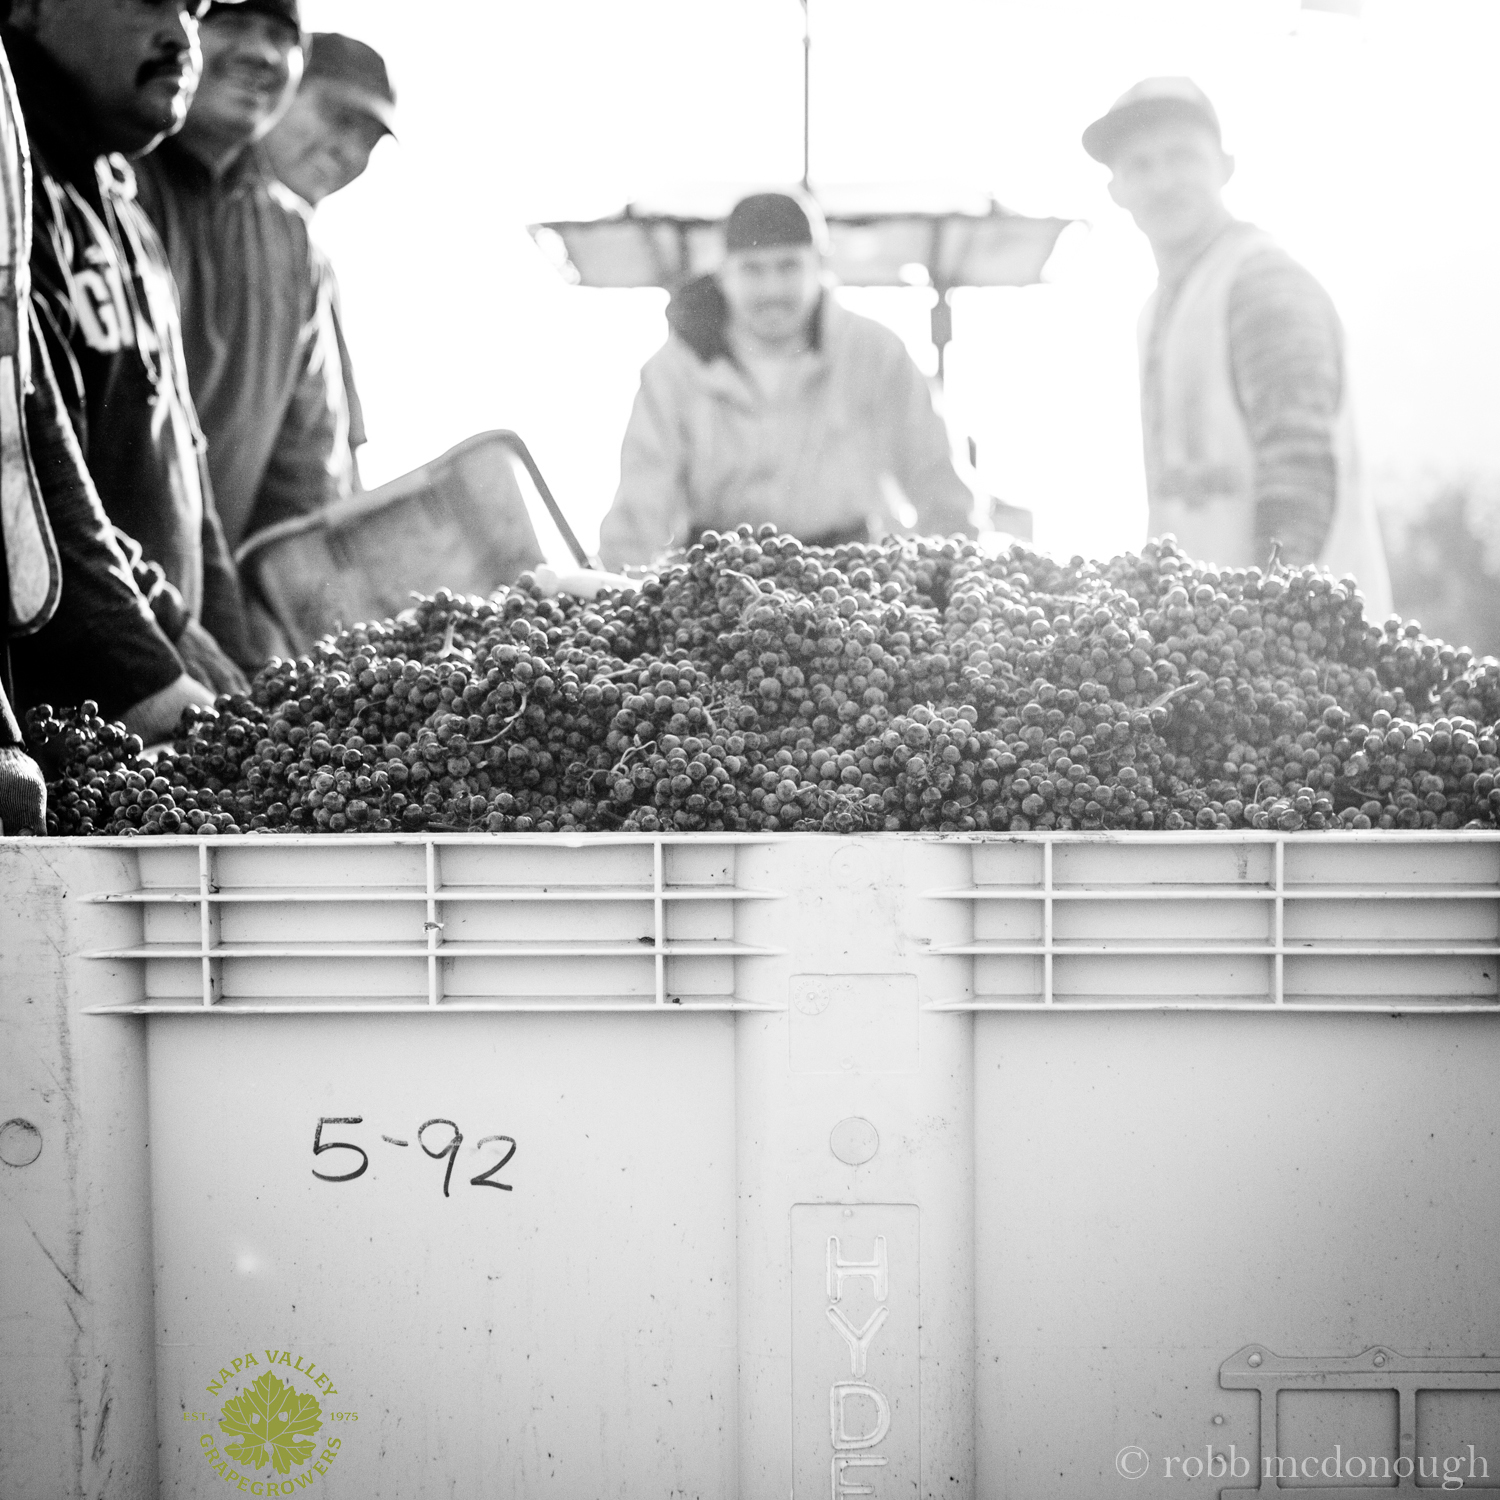 2014 wine grapes ready for sorting and crushing at Napa Valley's Hyde Vineyards.